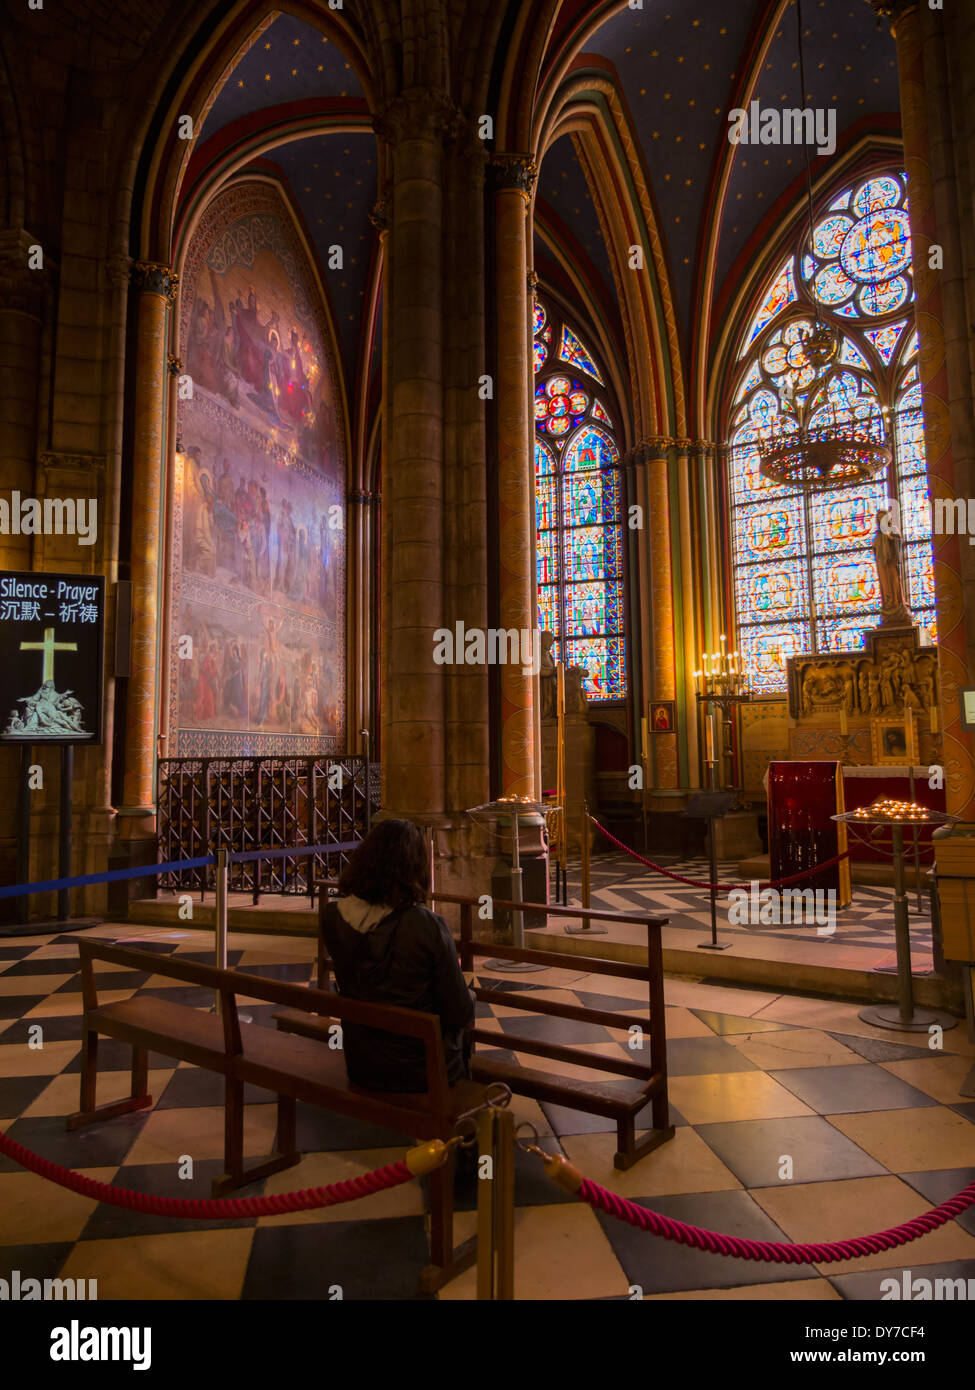 Interior of Notre Dame Cathedral, Paris. A woman prays in a chapel. Stock Photo